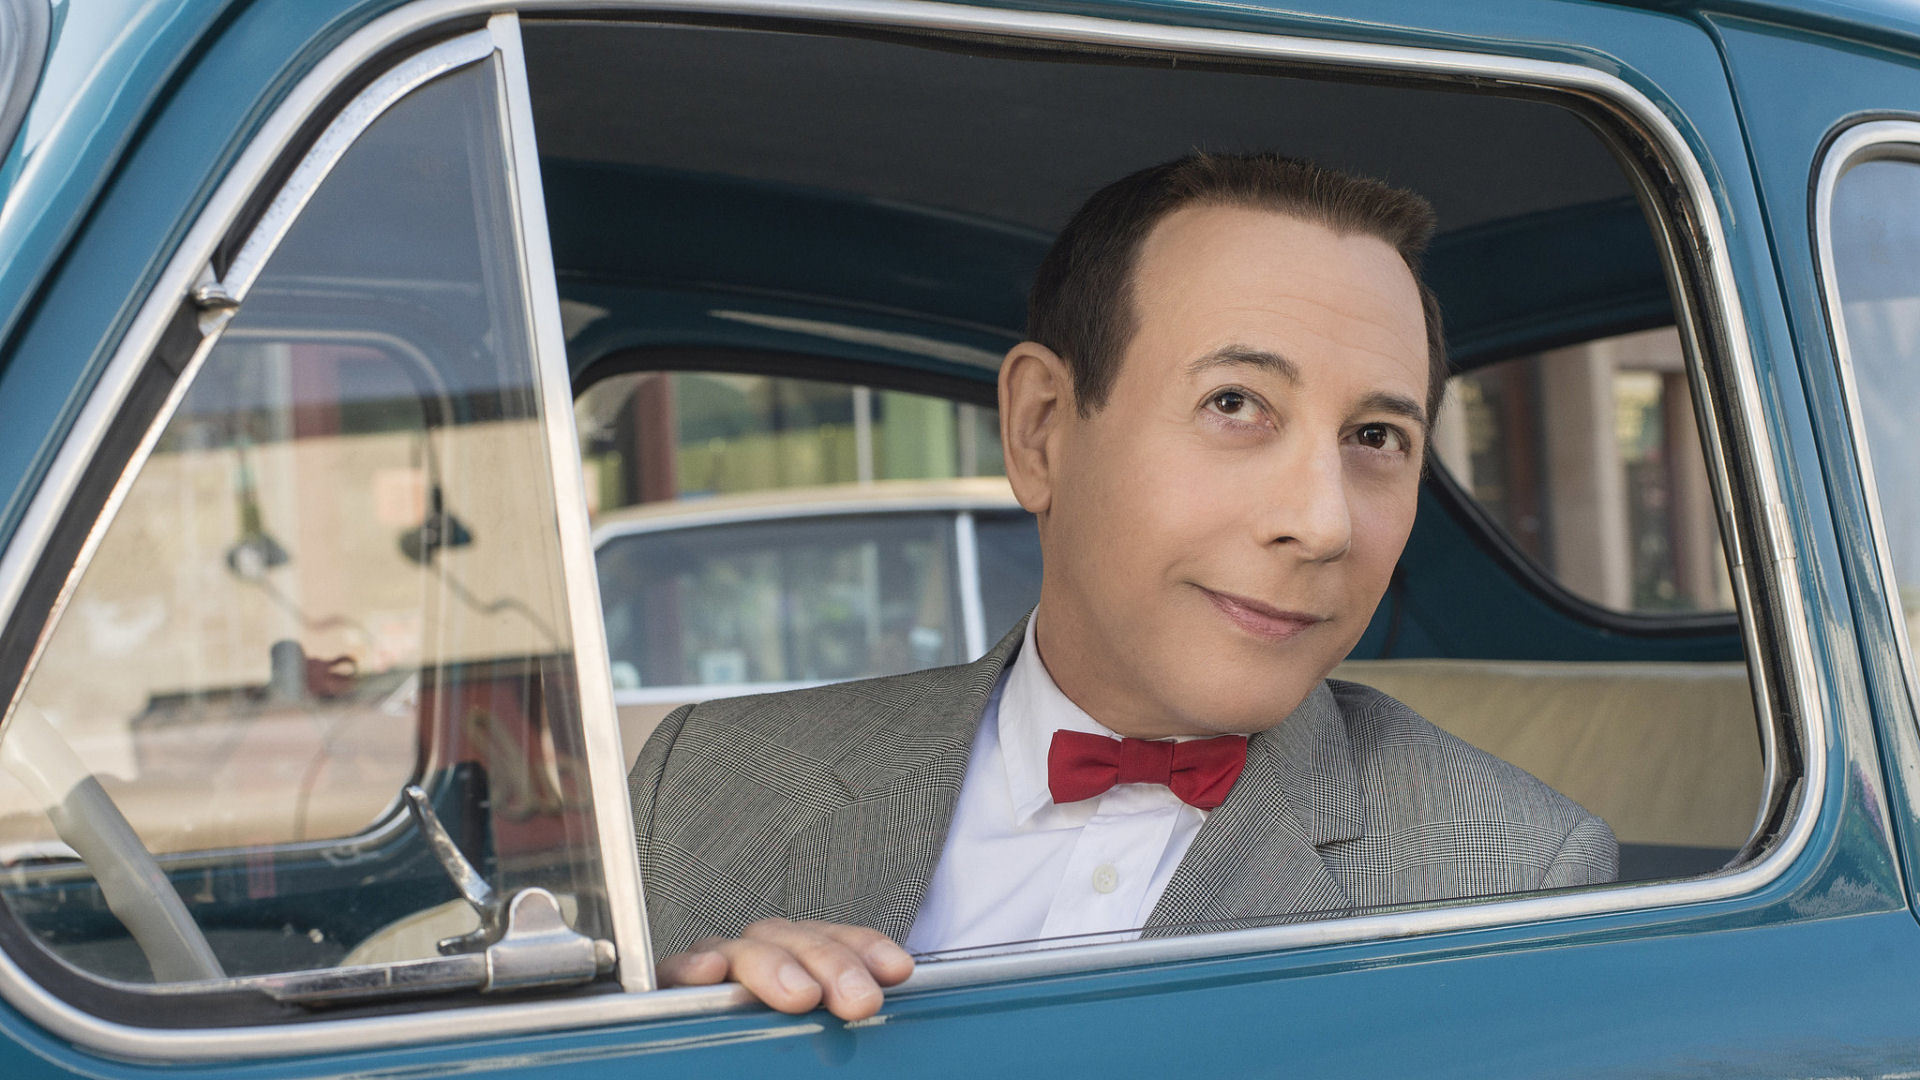 Paul reubens hd papers and backgrounds